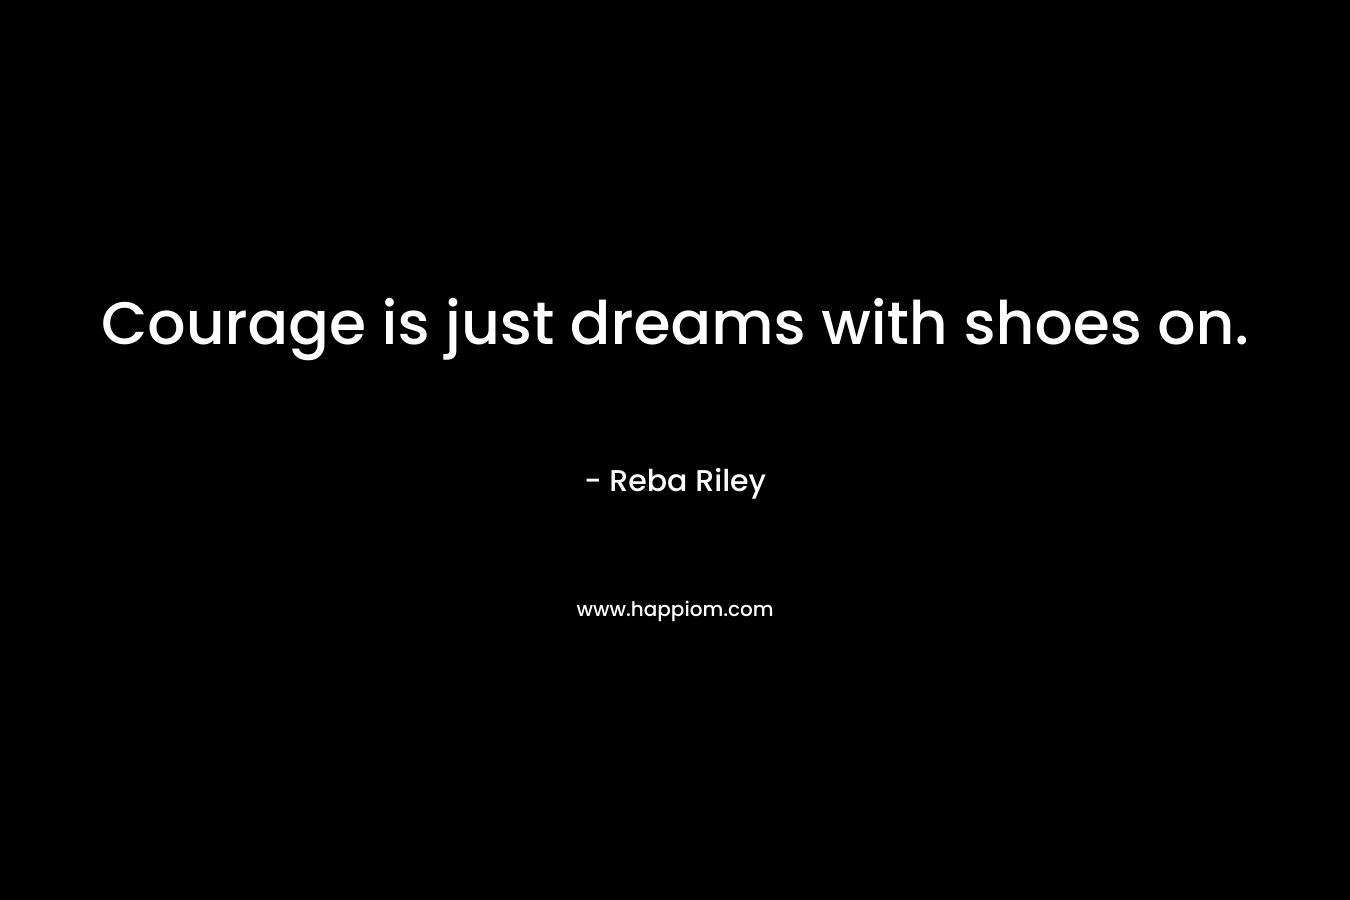 Courage is just dreams with shoes on. – Reba Riley